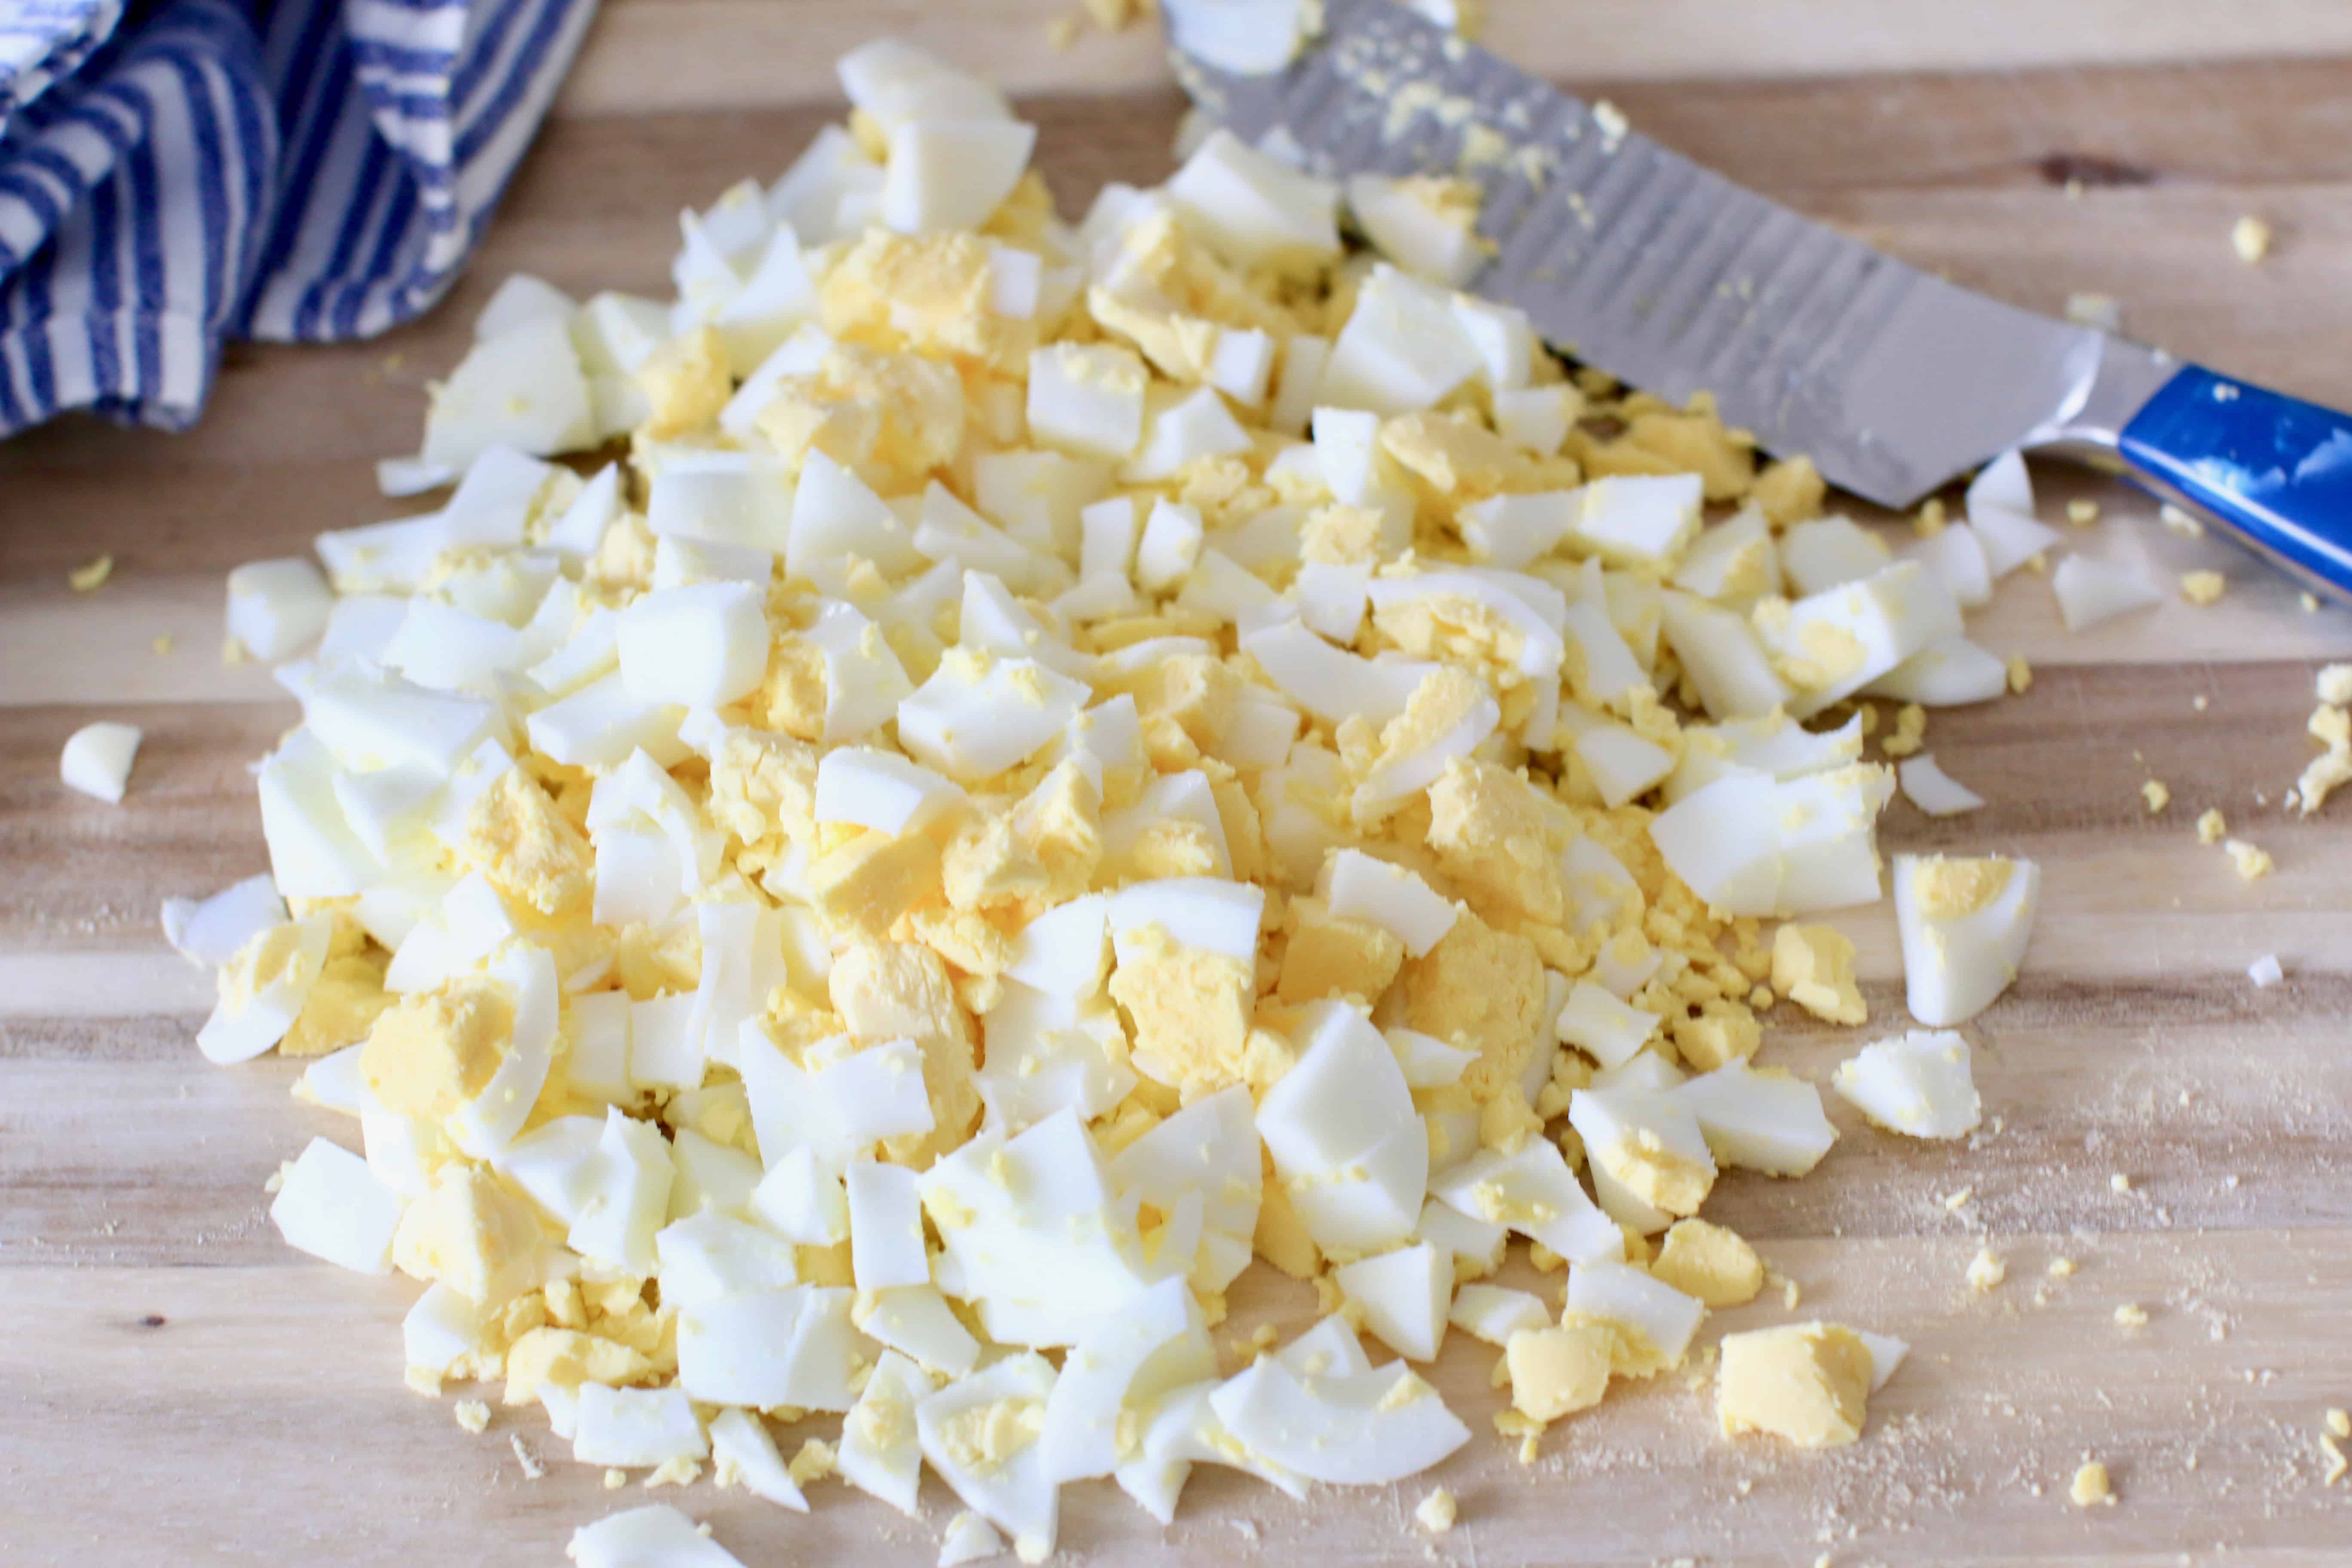 chopped hard-cooked eggs.